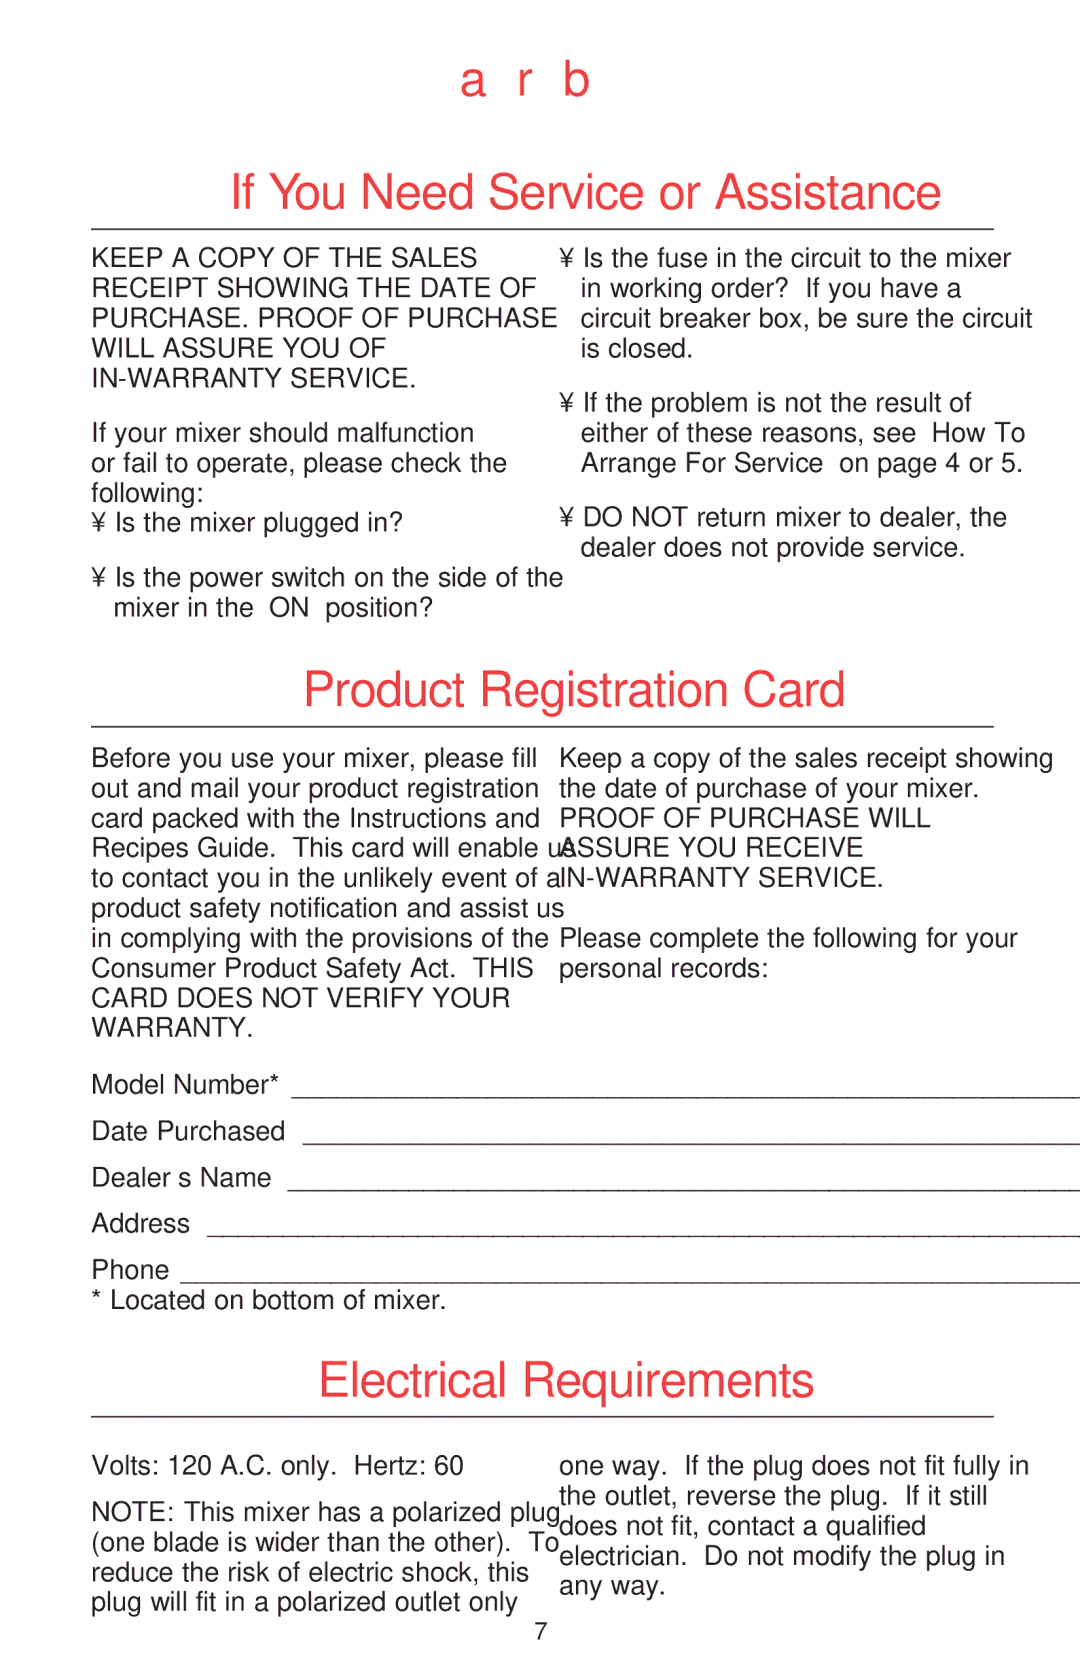 KitchenAid Mixer manual If You Need Service or Assistance, Product Registration Card, Electrical Requirements 